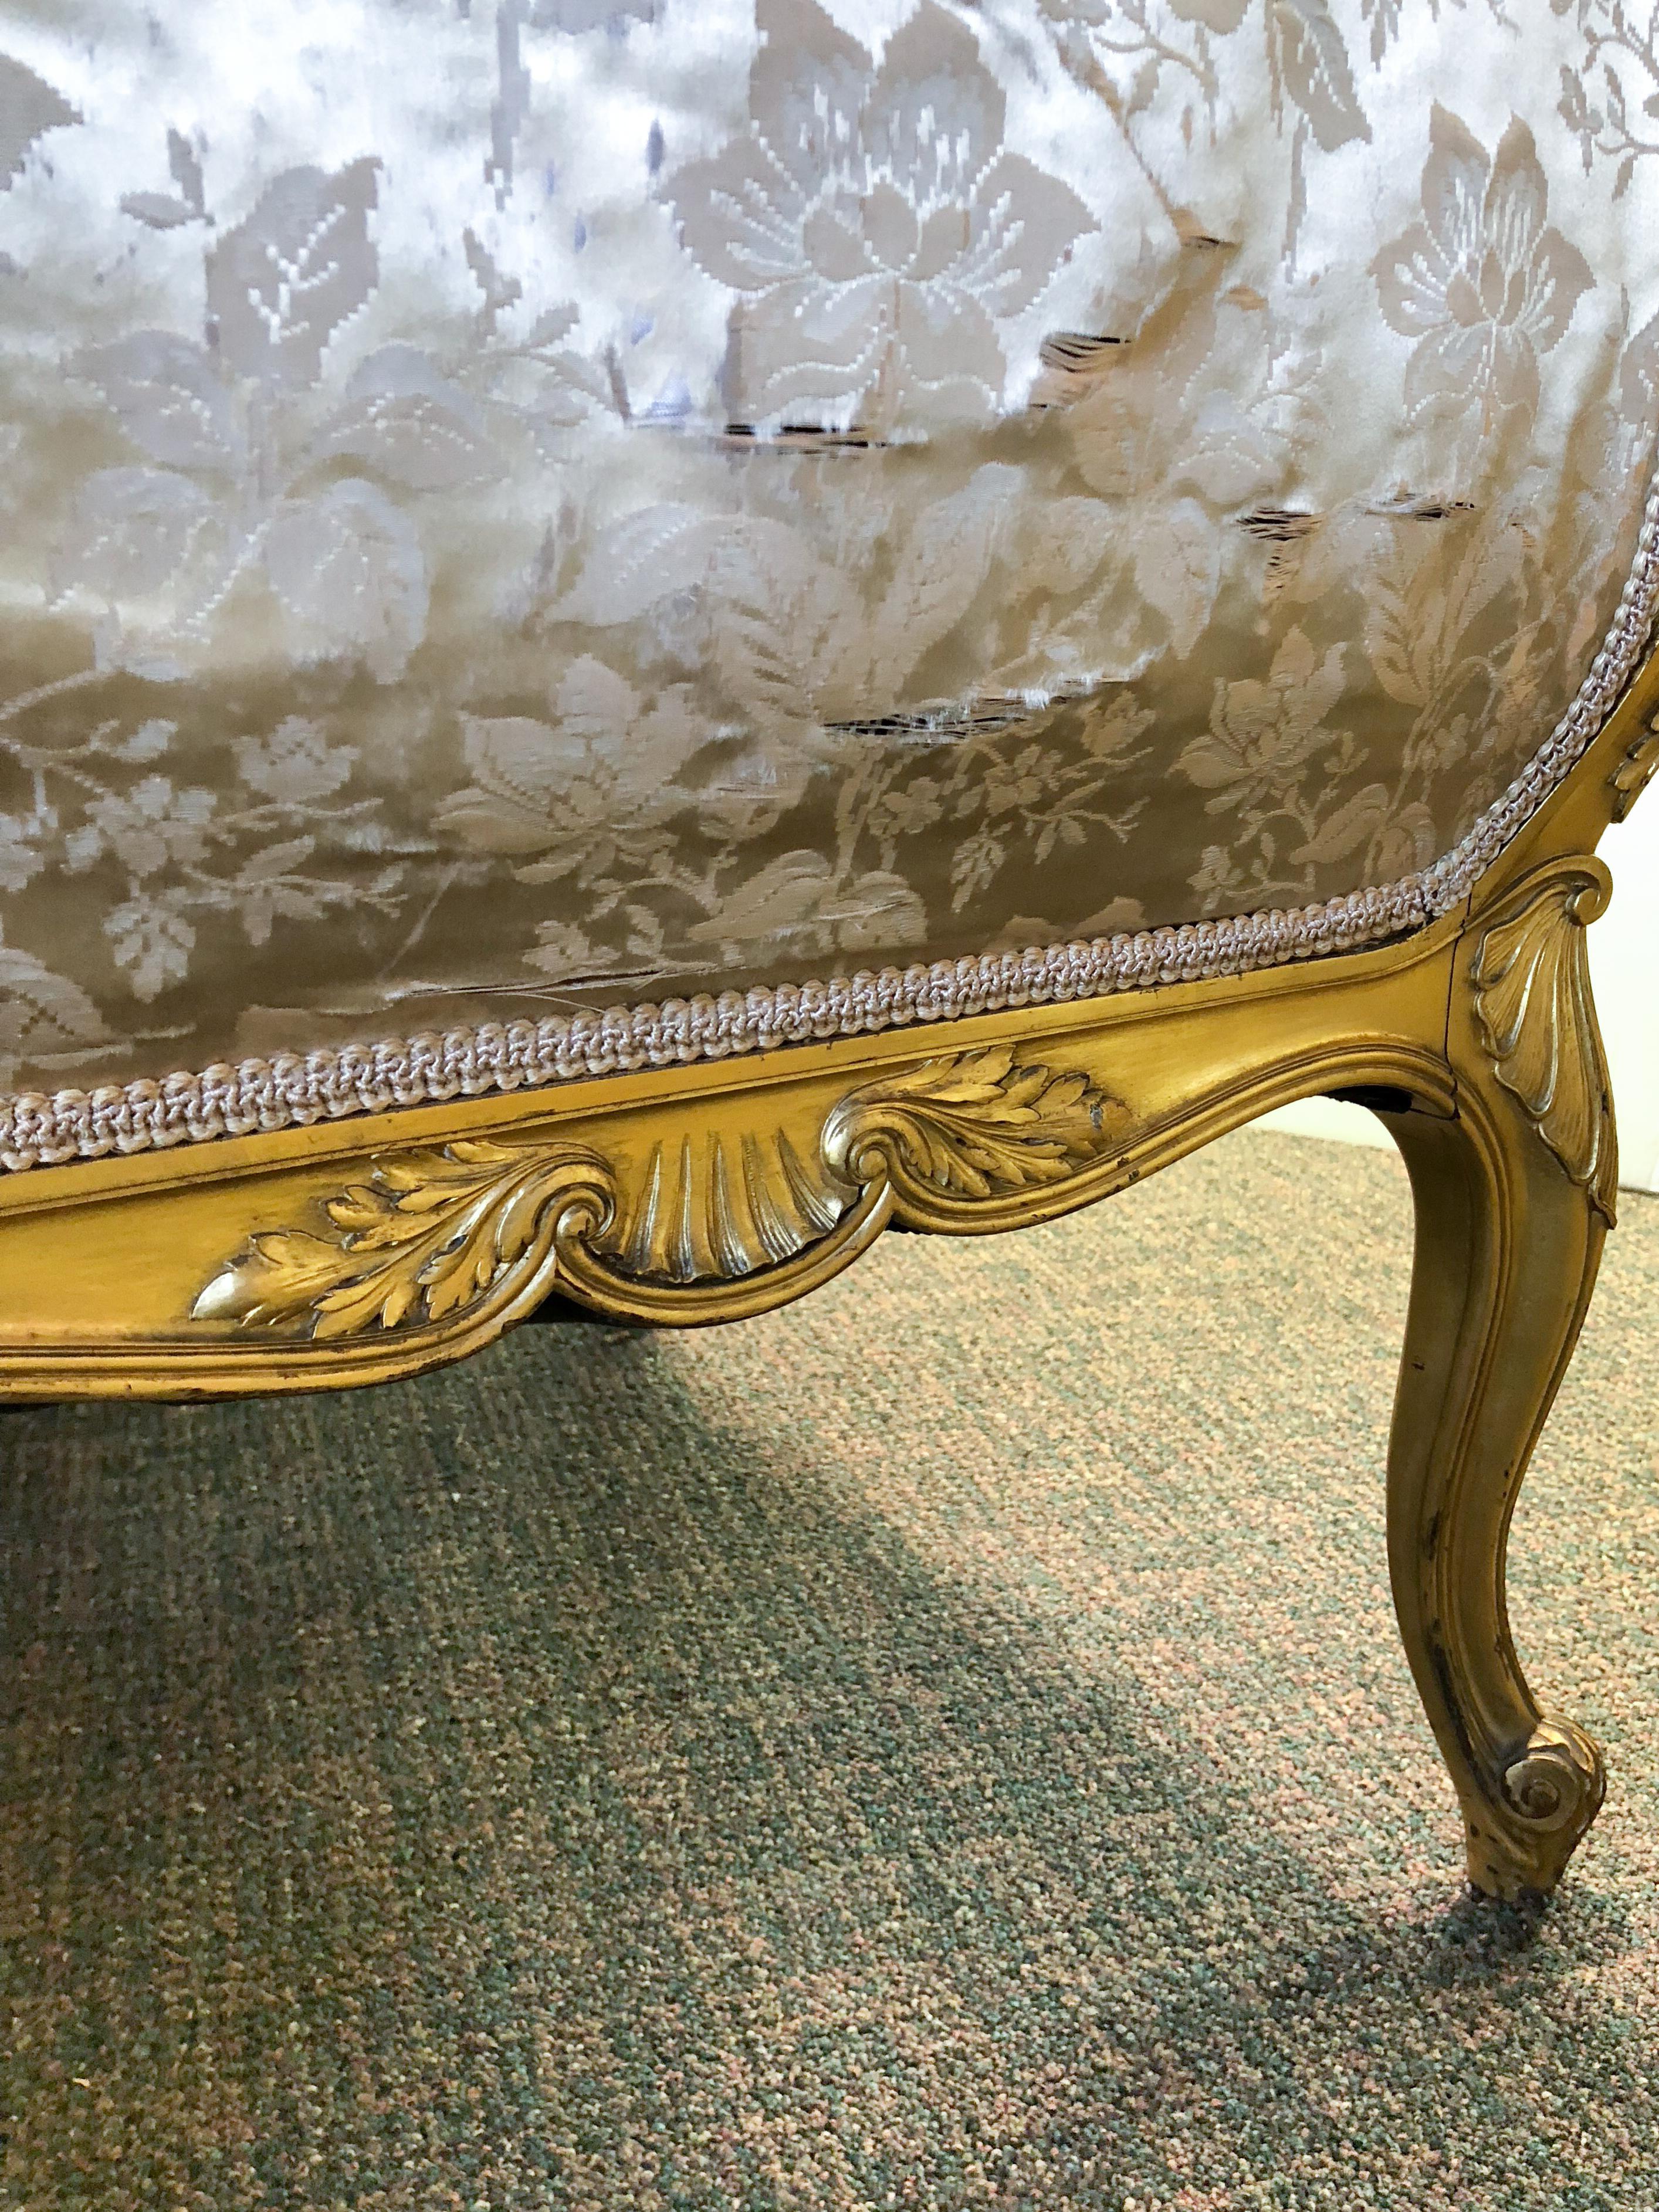 A 19th century Louis XV gilt carved mahogany settee with what appears to be original silk upholstery, horsehair stuffing and antique sprung seat. Beautifully carved mahogany frame, prime for reupholstery; some wear to gilding and frame consistent